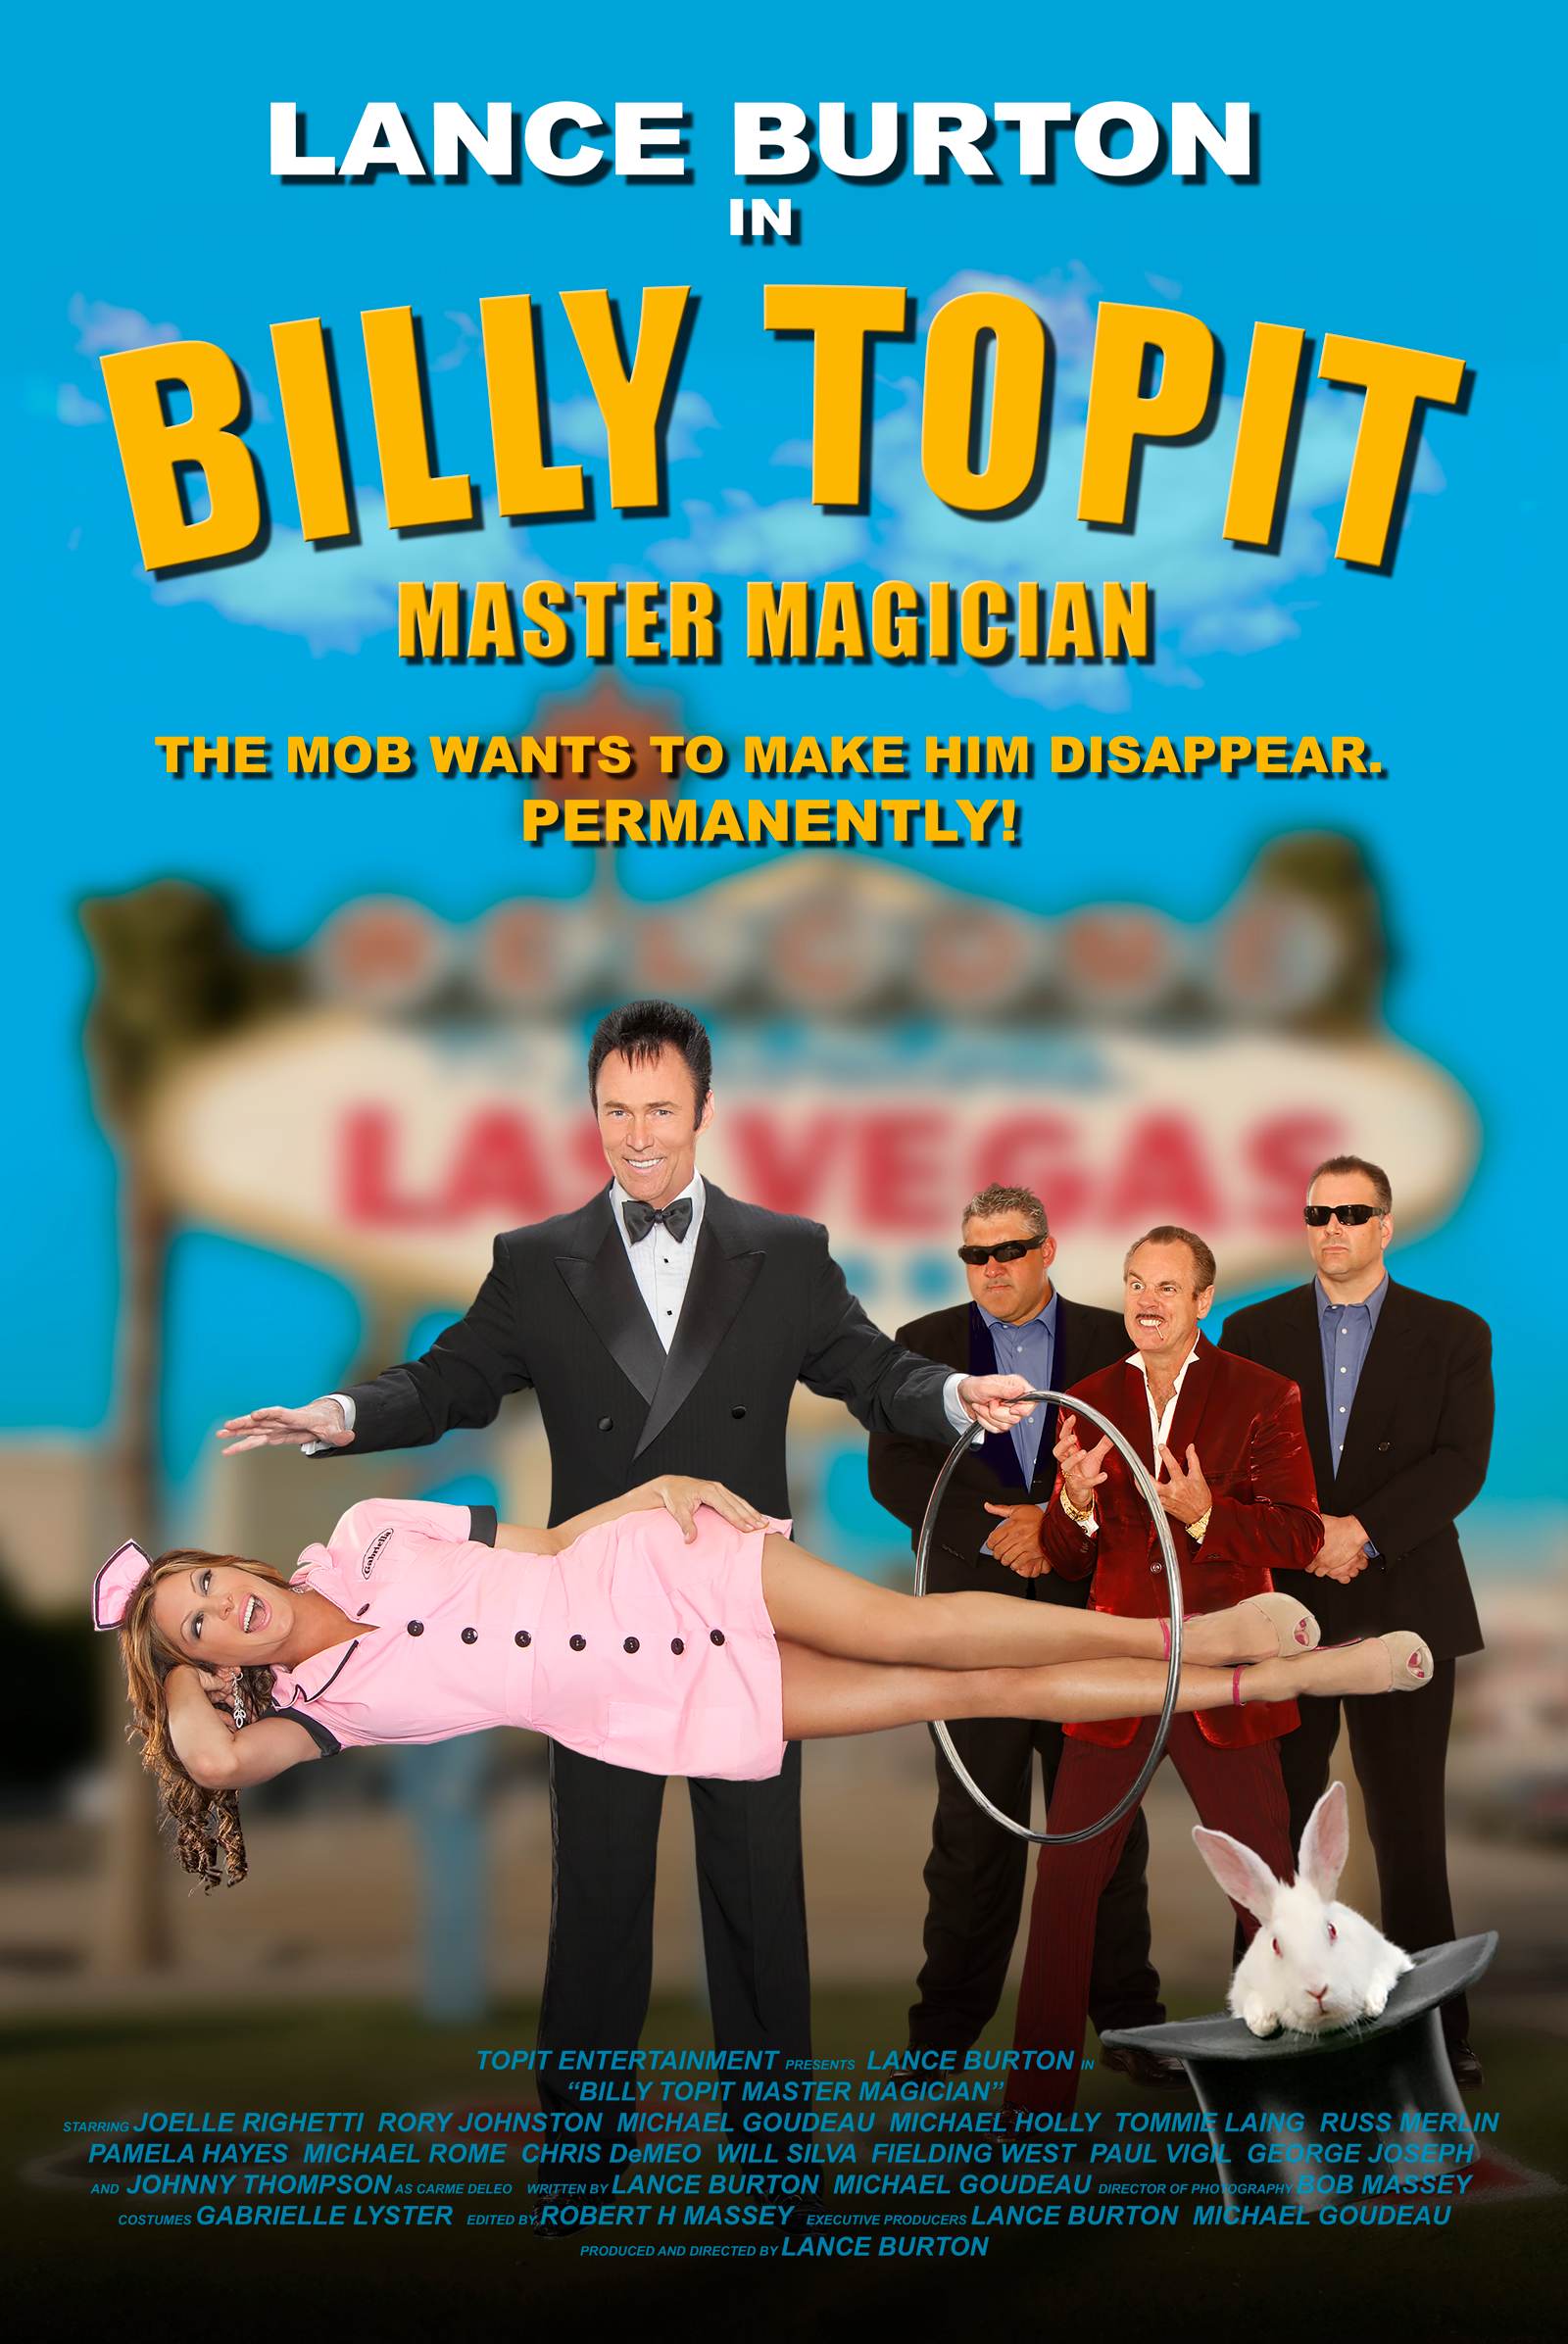 Billy Topit Master Magician